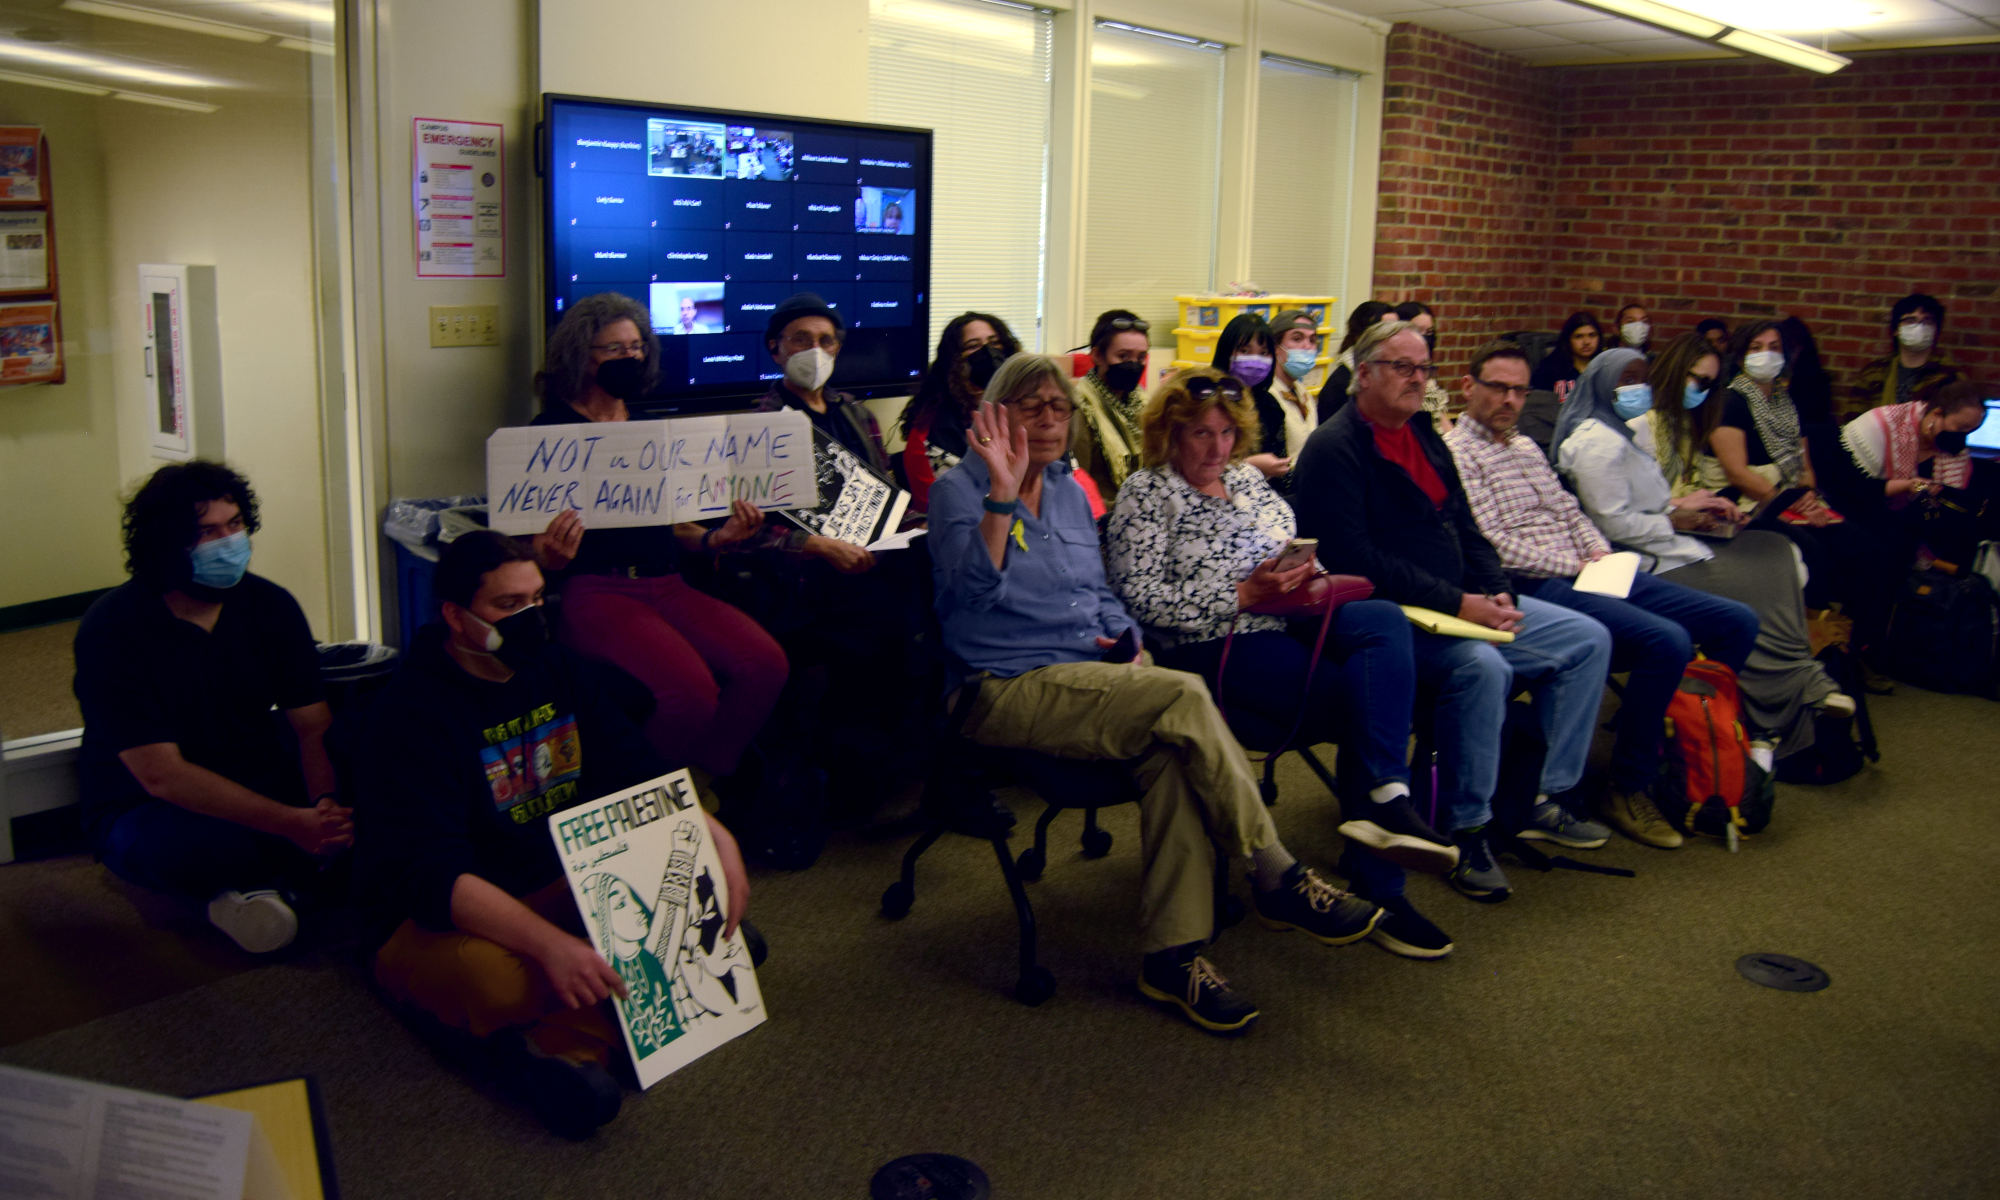 Members of the public sit in the designated public area, several with signs.